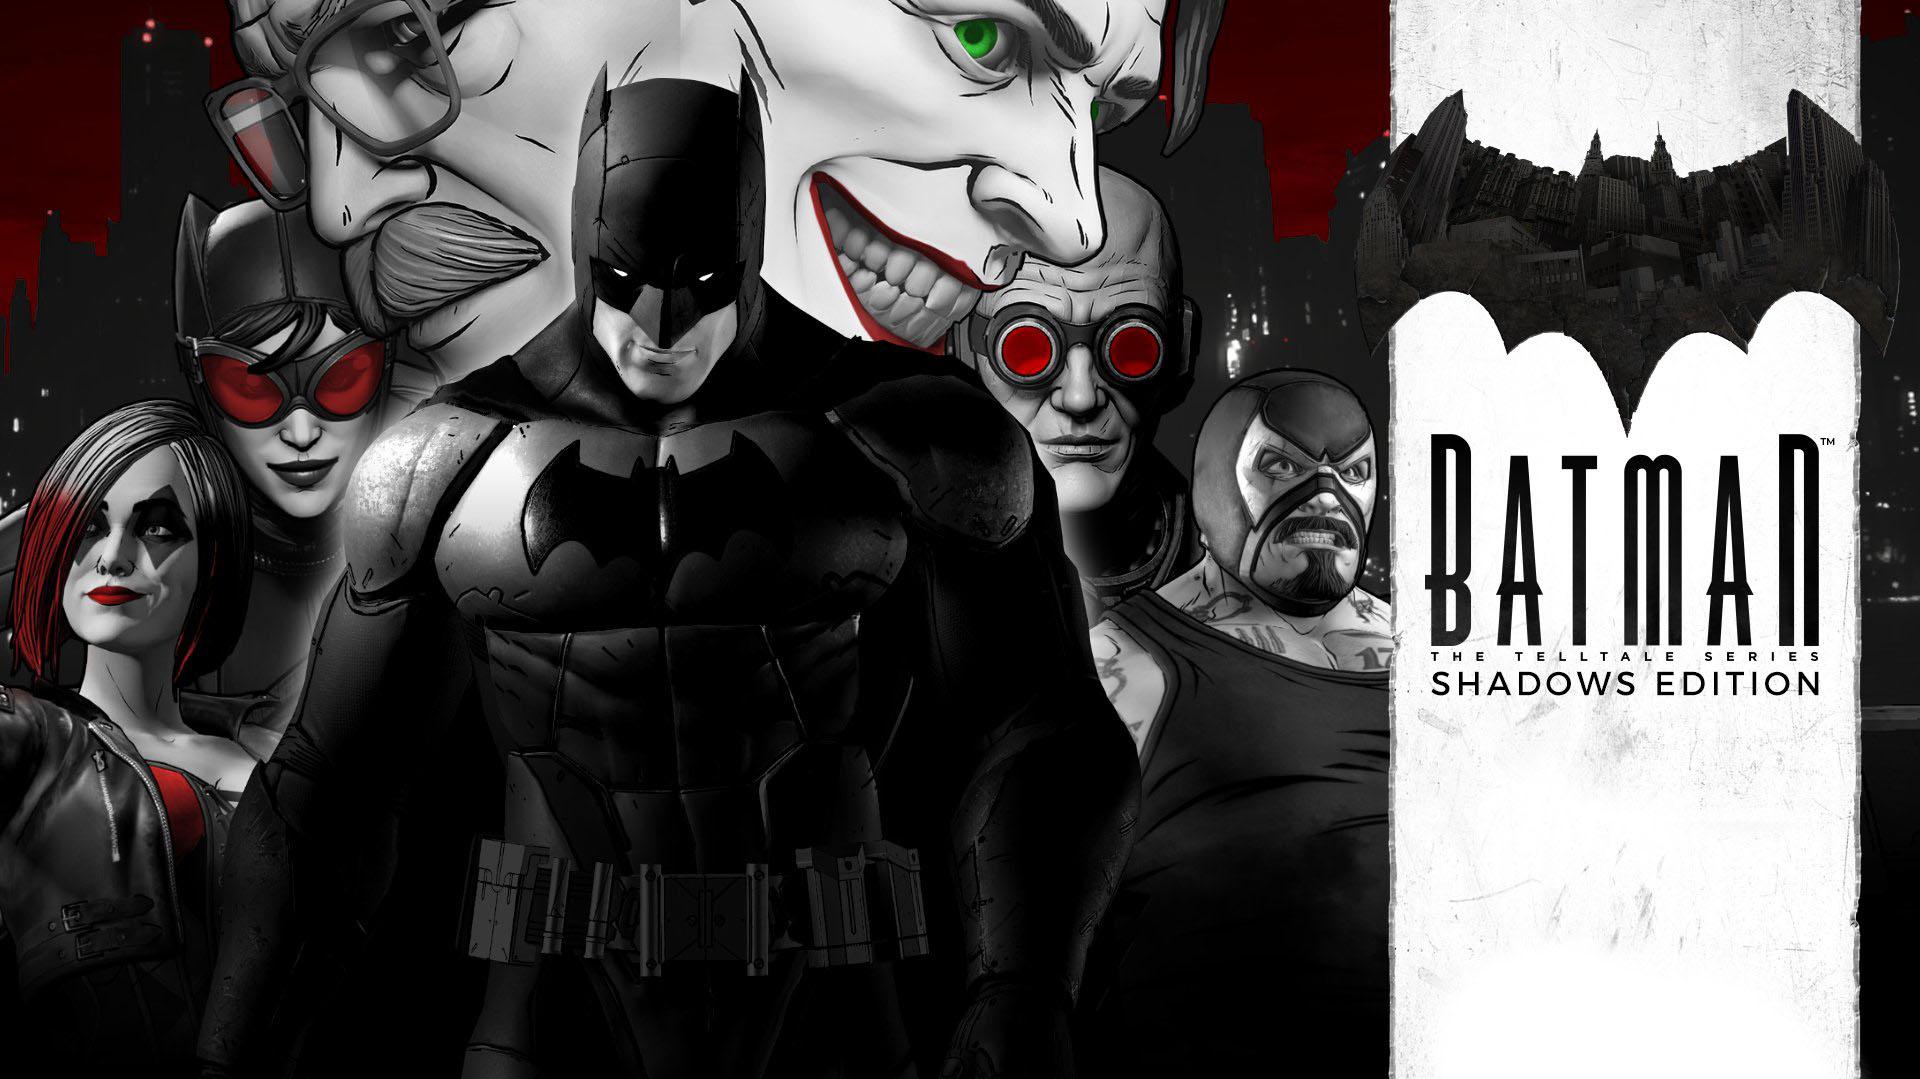 The Telltale Batman Shadows Edition Is Available Now On Xbox One